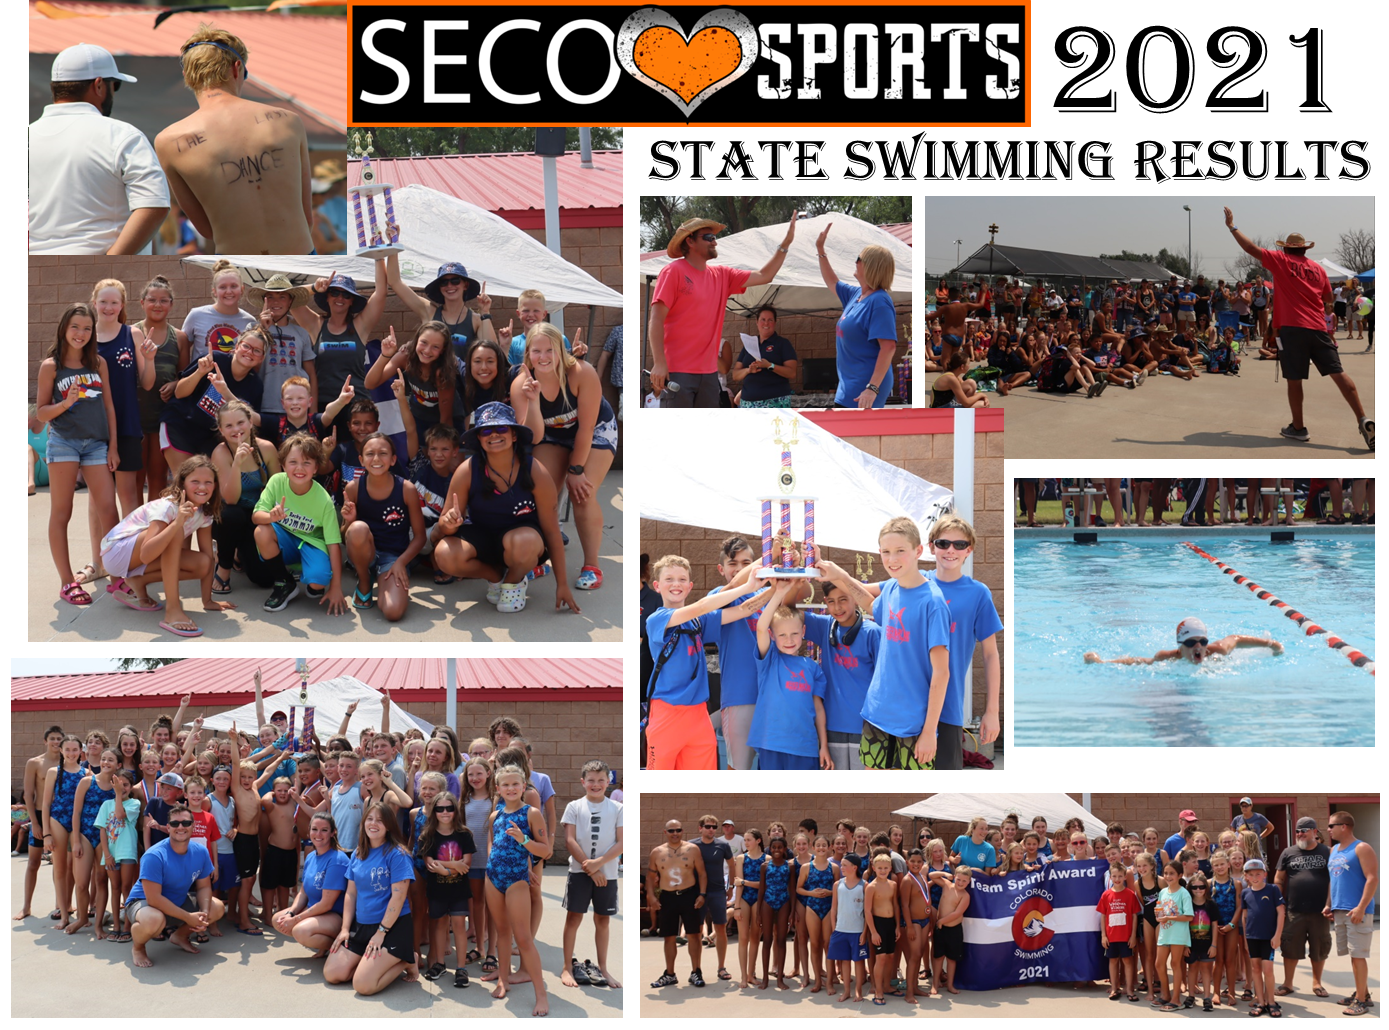 State Swim SECO News Cover Image seconews.org